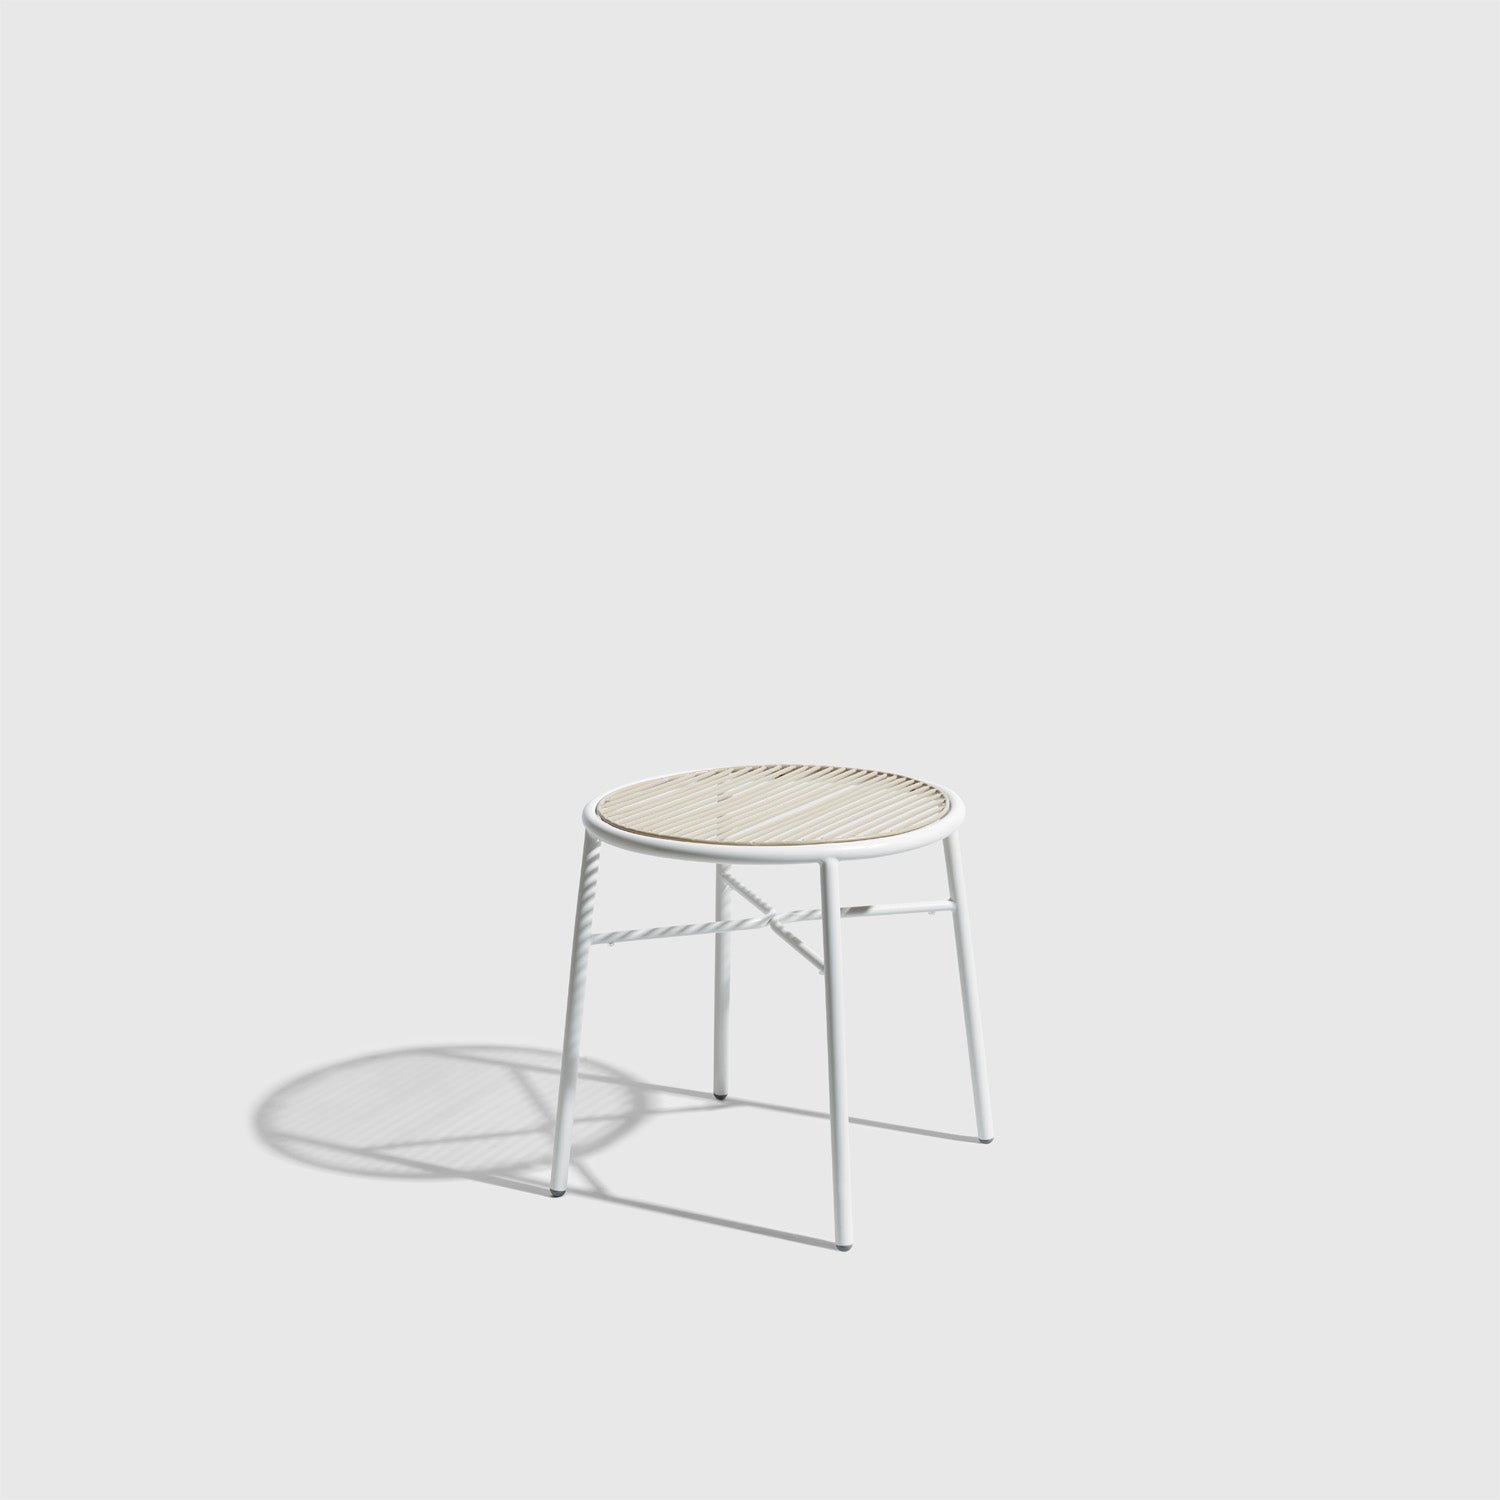 Piper Low and Bar Stools | Indoor/Outdoor Seating | DesignByThem | GibsonKarlo